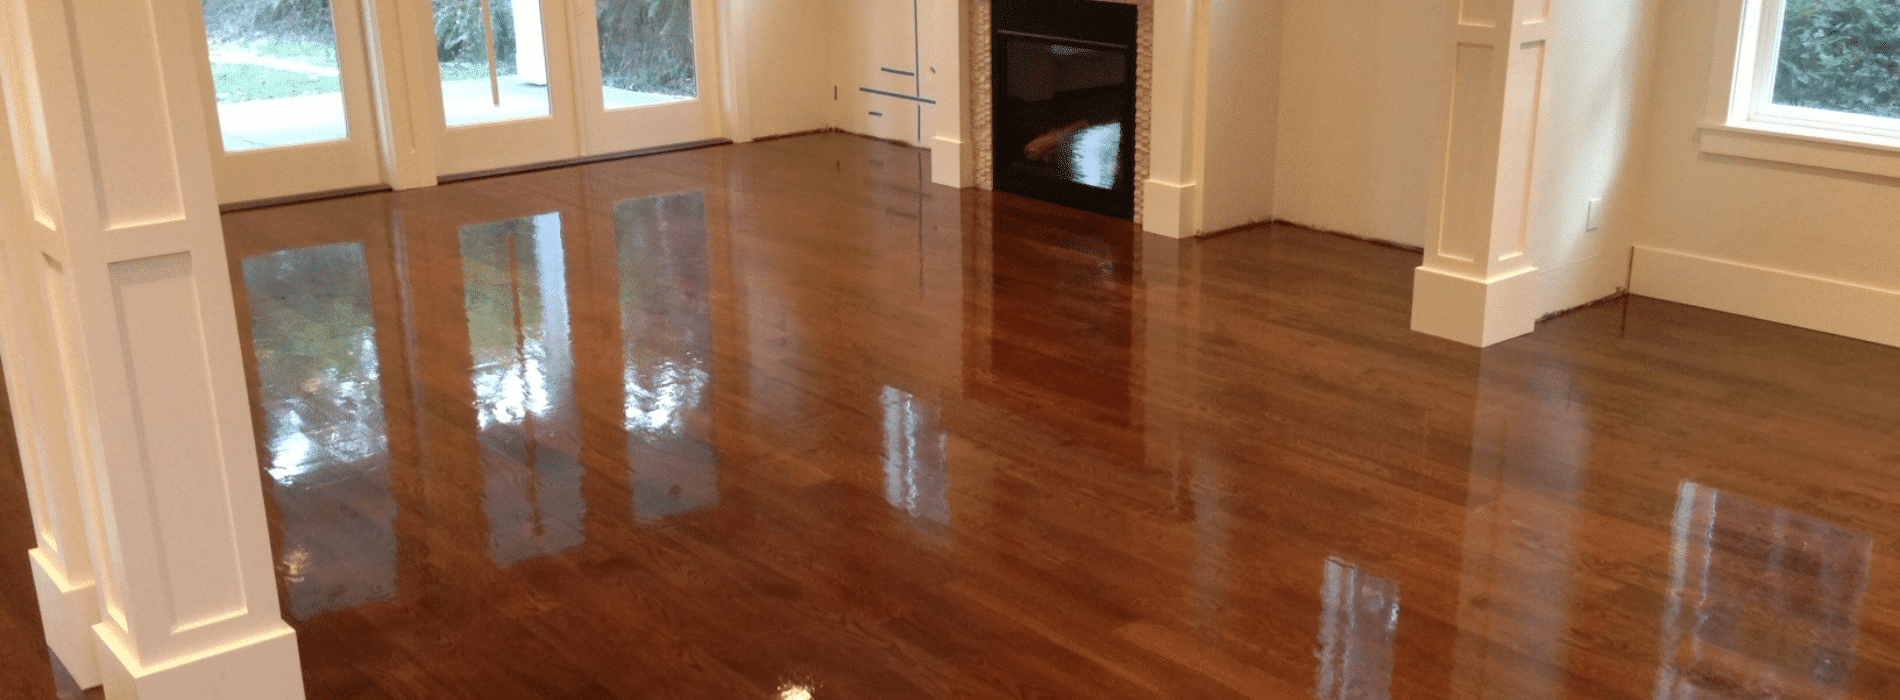 Expertly restored 5-year-old hardwood floor in Spelthorne, TW15. Mr Sander® used Bona 2.5K Frost whitewashing and Traffic HD 18% sheen matte lacquer. Durable and stunning, this finish guarantees long-lasting beauty. 